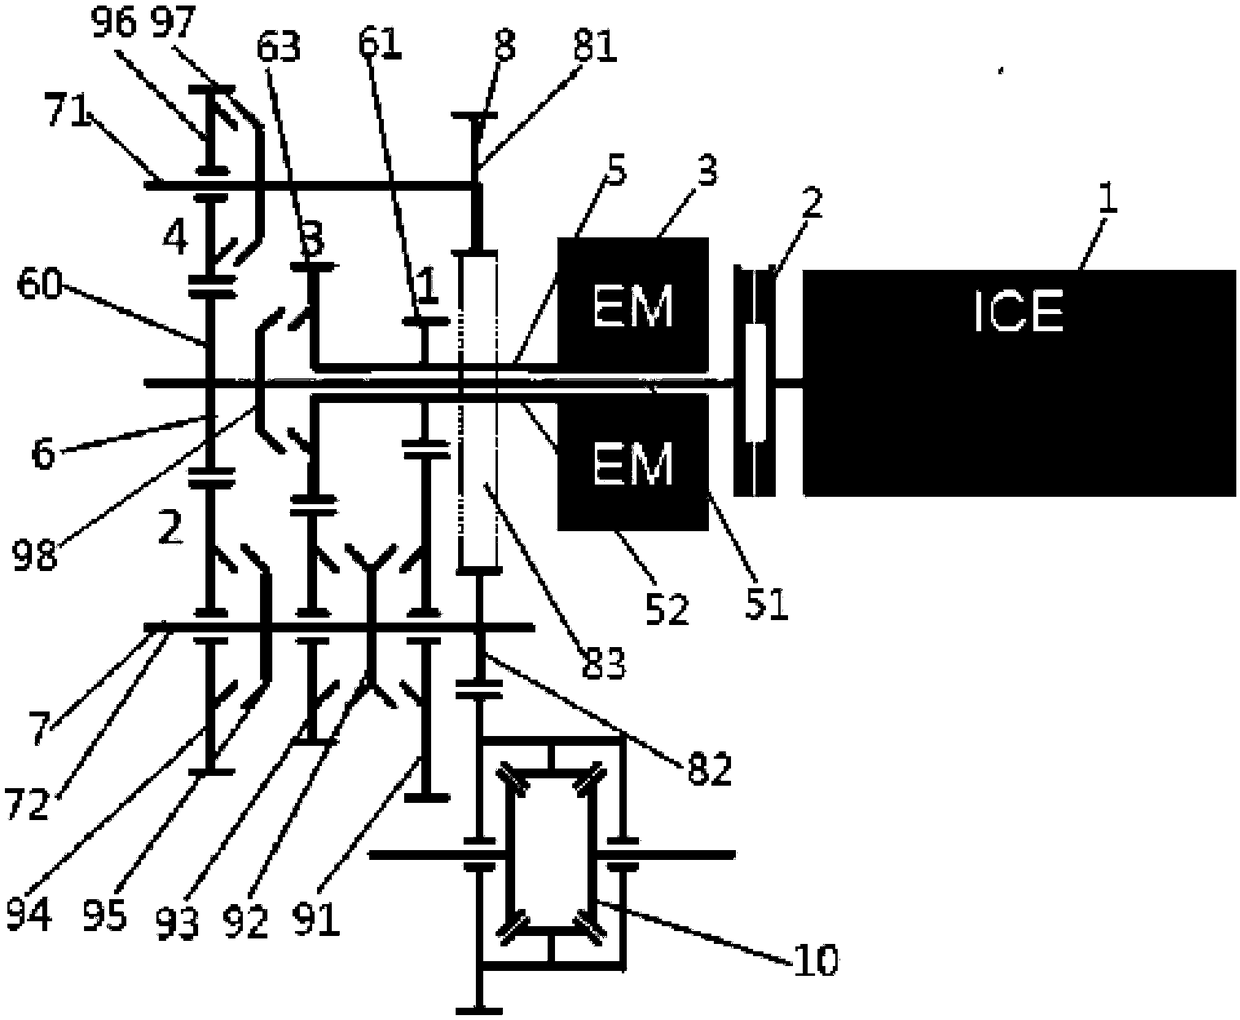 Hybrid power transmission system with dual gear structure